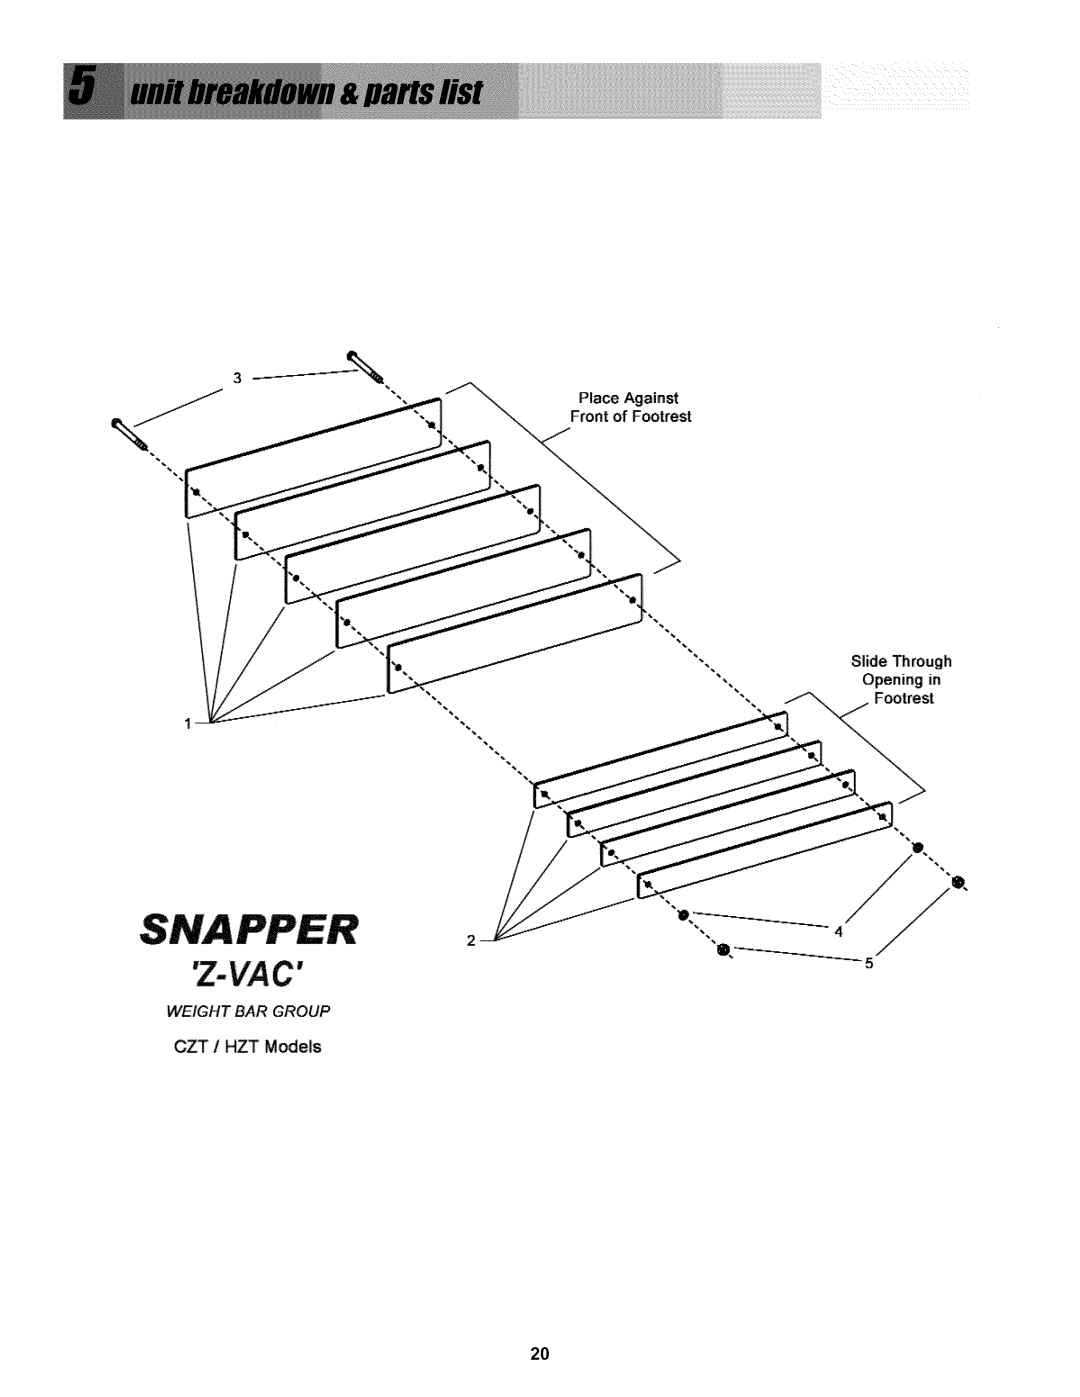 Snapper P/N 7078273, 0-50576 manual Weight Bar Group, Place Against, Front of Footrest, Slide Through Opening in 